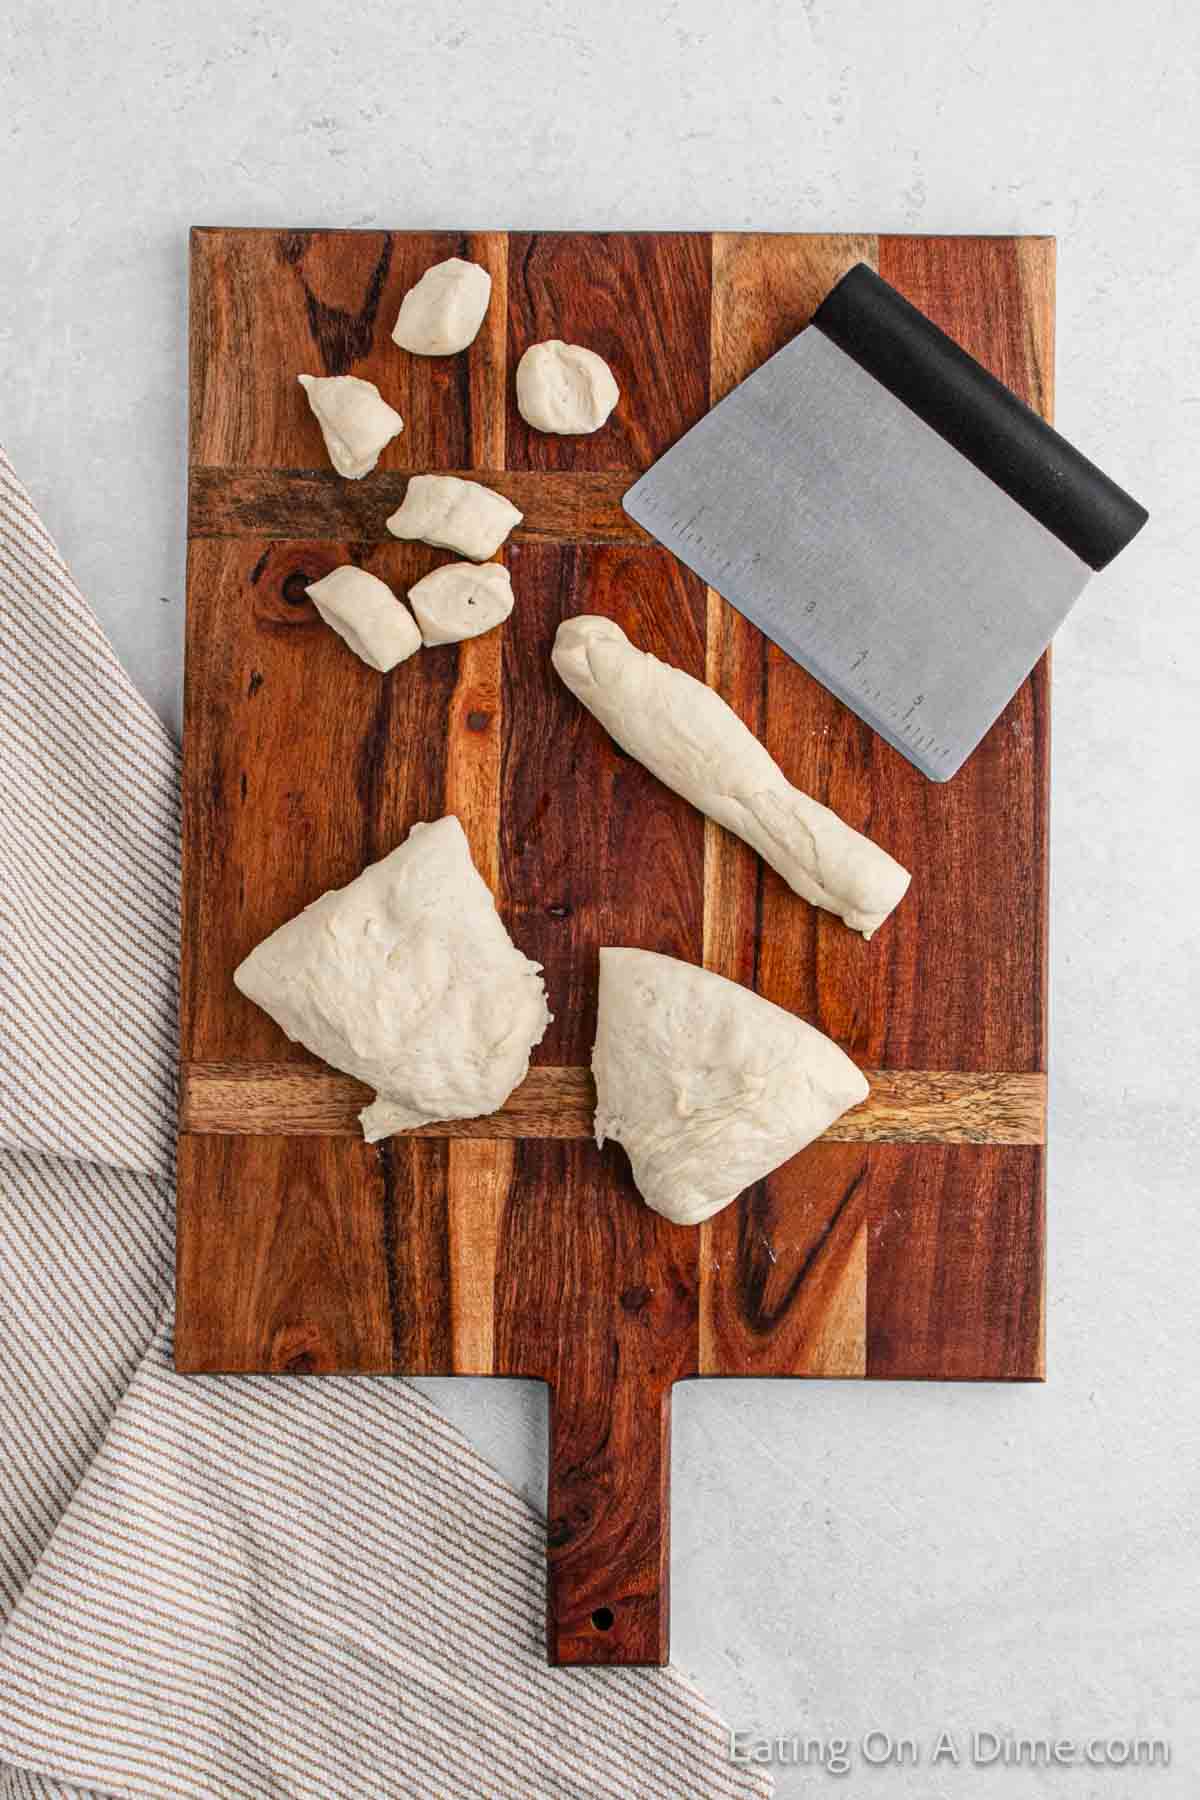 Rolling the dough on a cutting board and cutting into bite size pieces